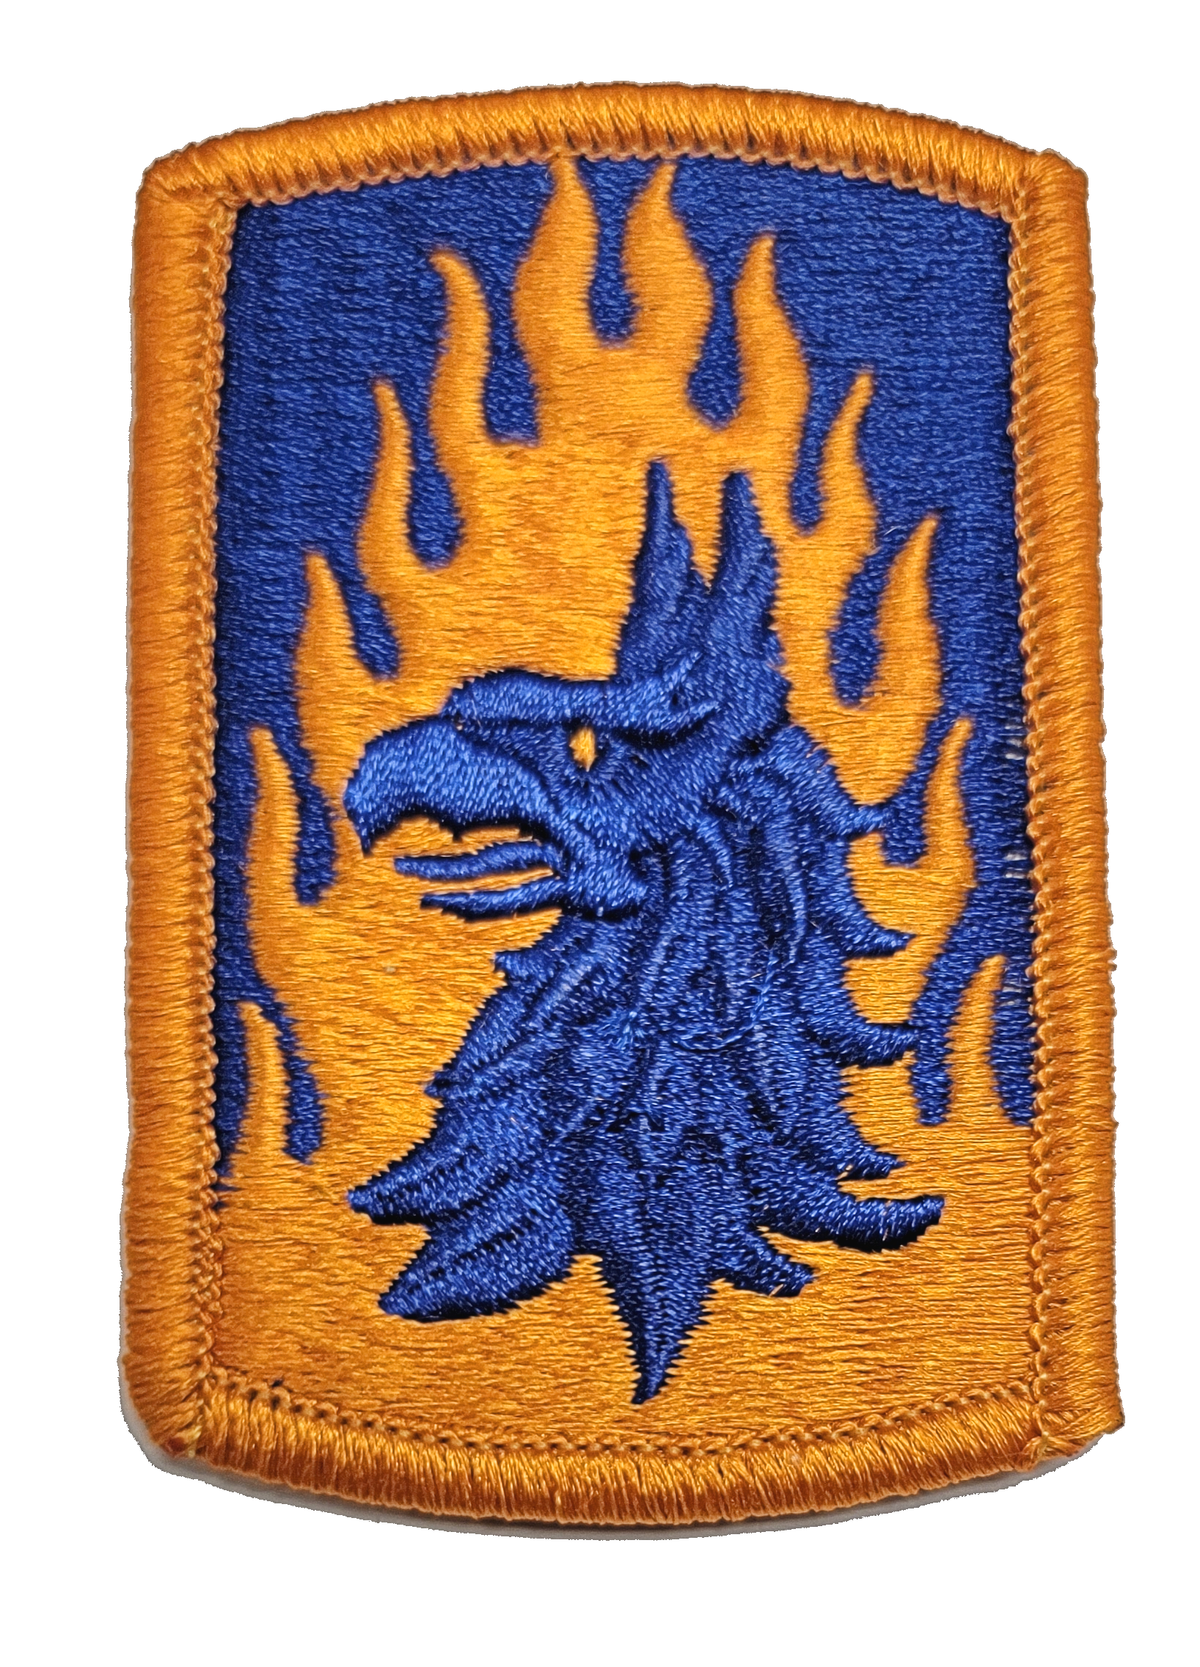 12th Aviation Brigade Patch - Full Color Dress